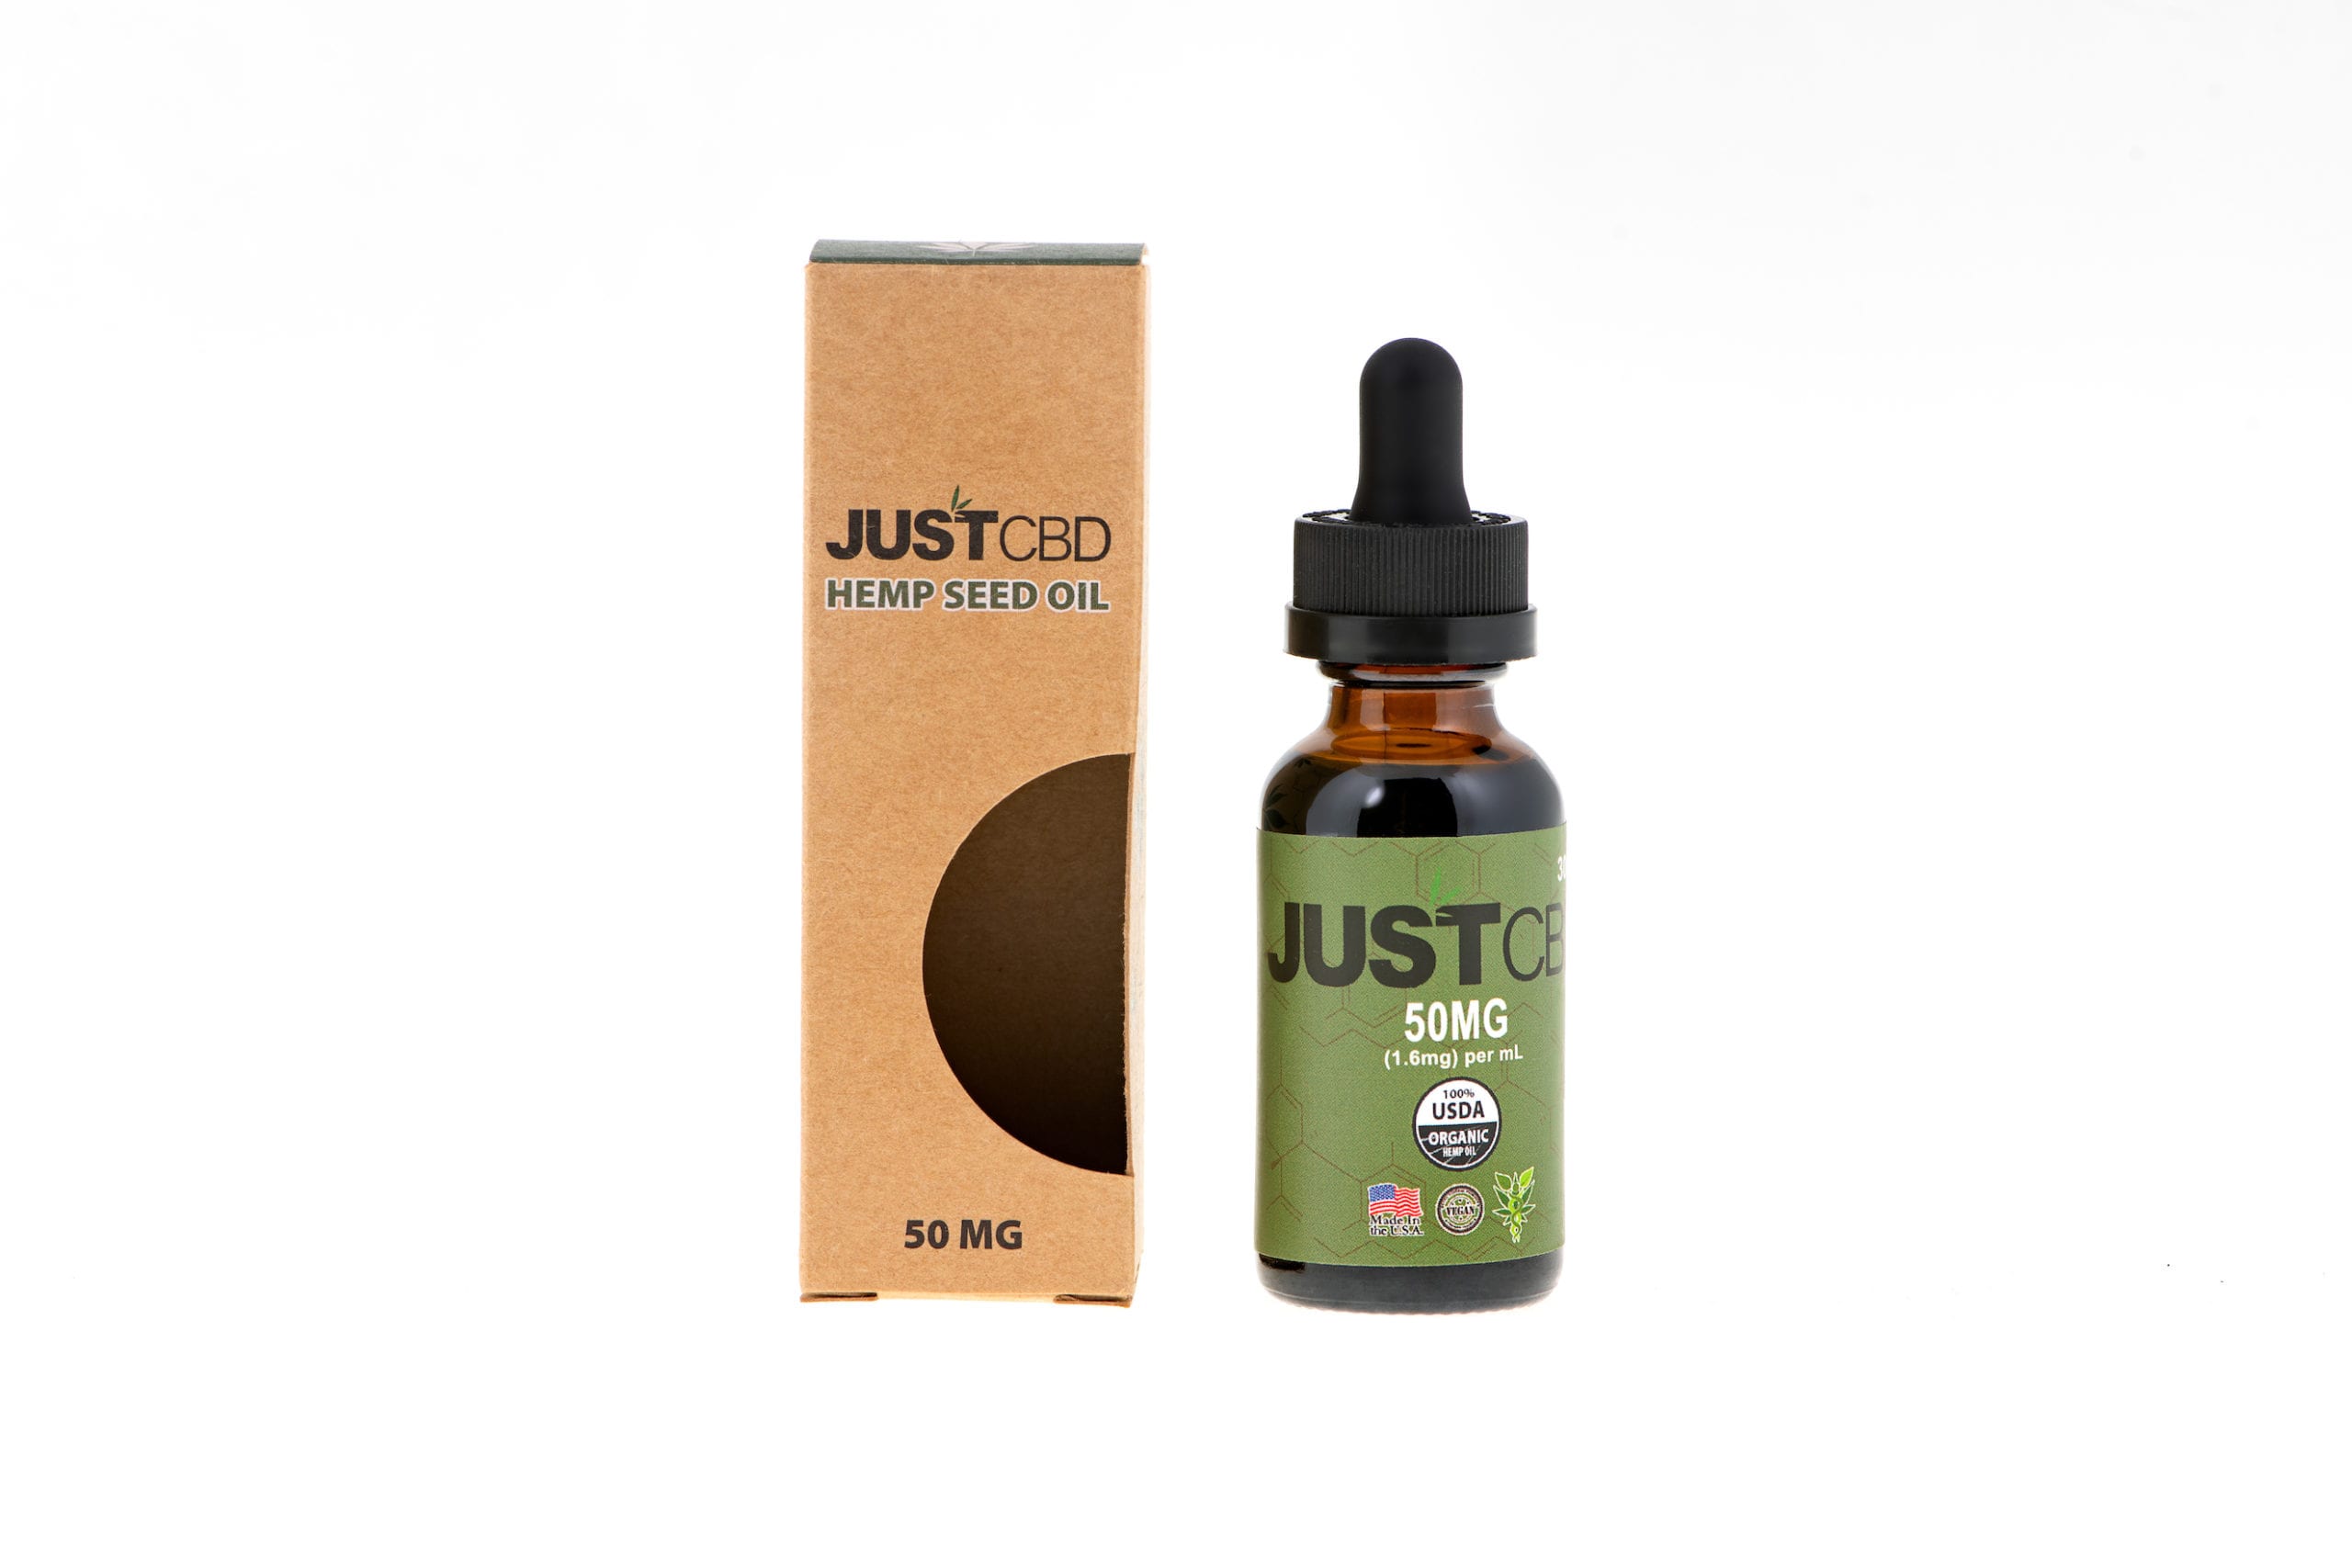 JustCBD Product Photography and Just CBD Products Closeup of JUST CBD Hemp Seed Oil drops bottle with package